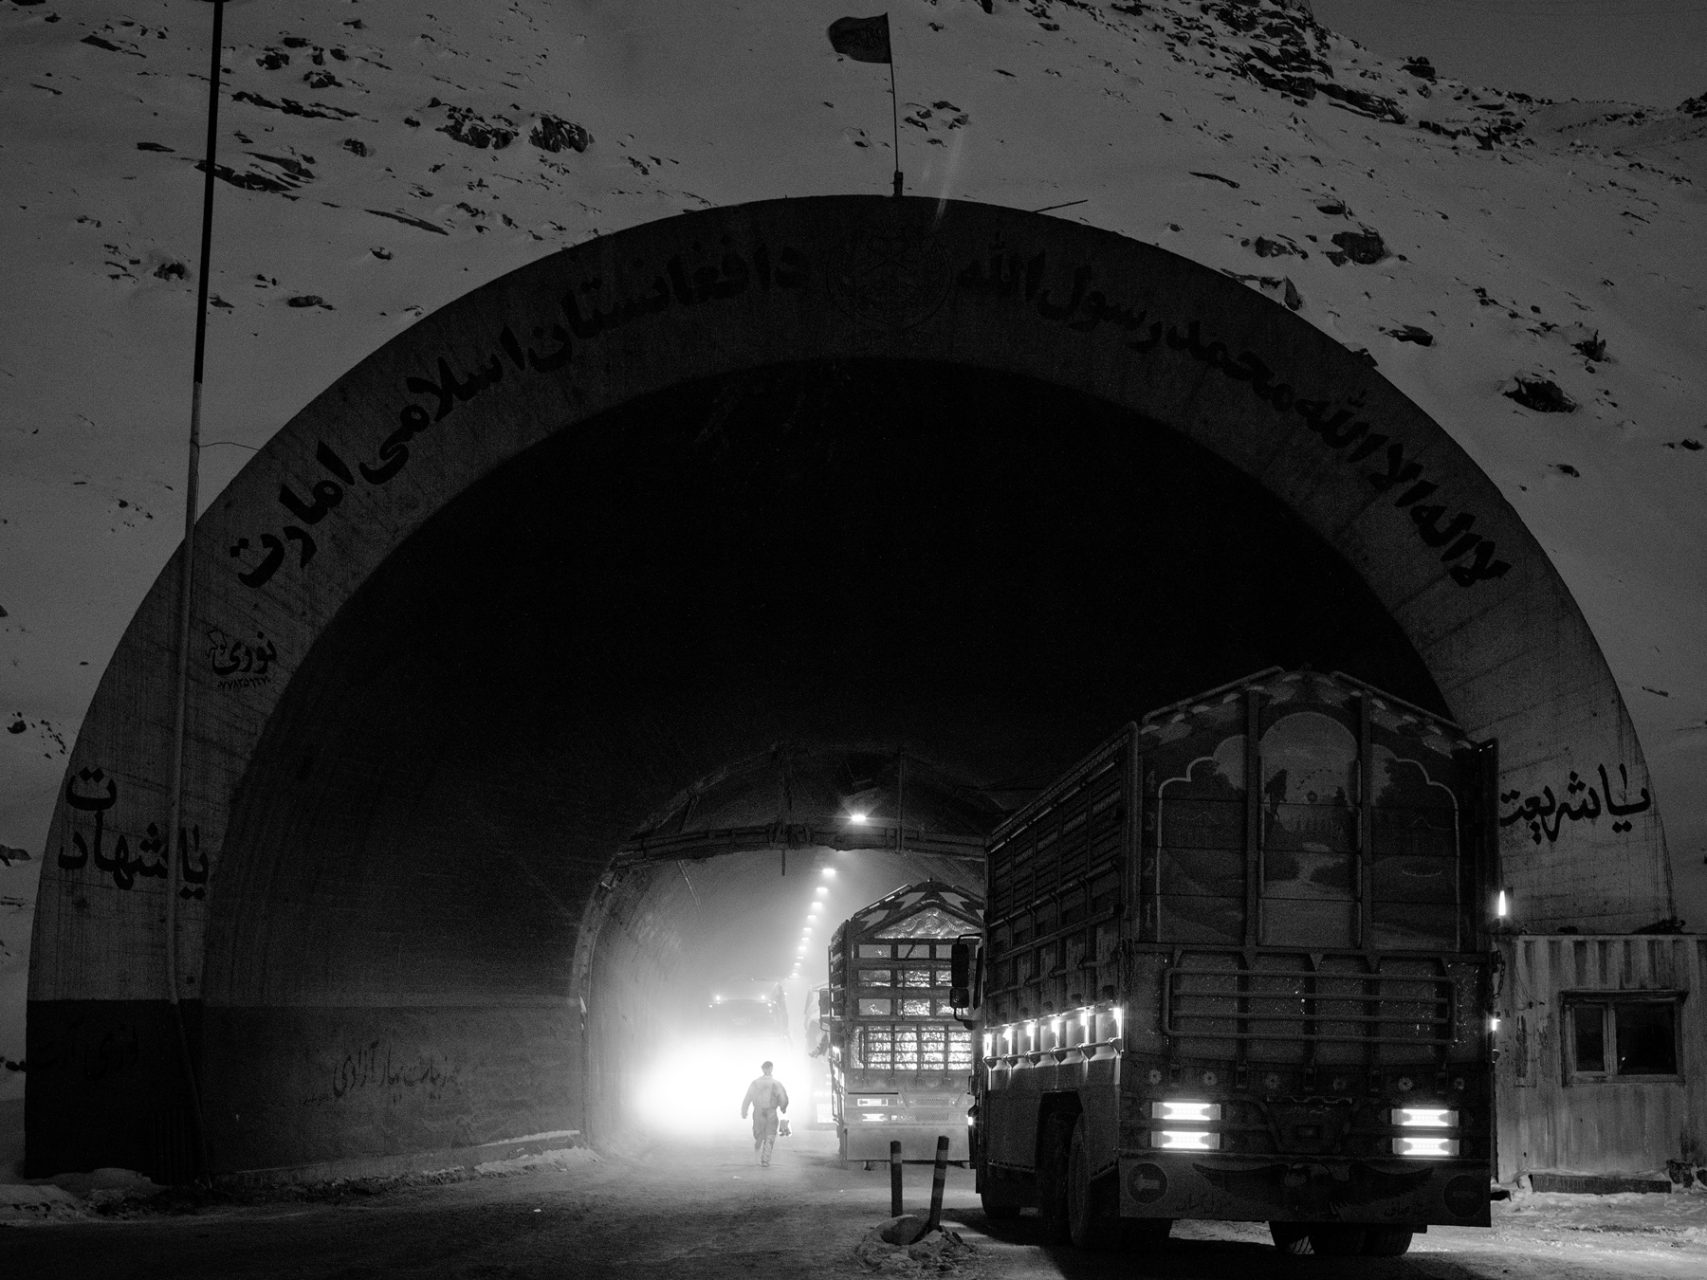 A co-driver runs to reach his truck that has just entered the Northern side of the Salang tunnel which has been painted with Taliban's slogan "Either Sharia or Martyrdom".